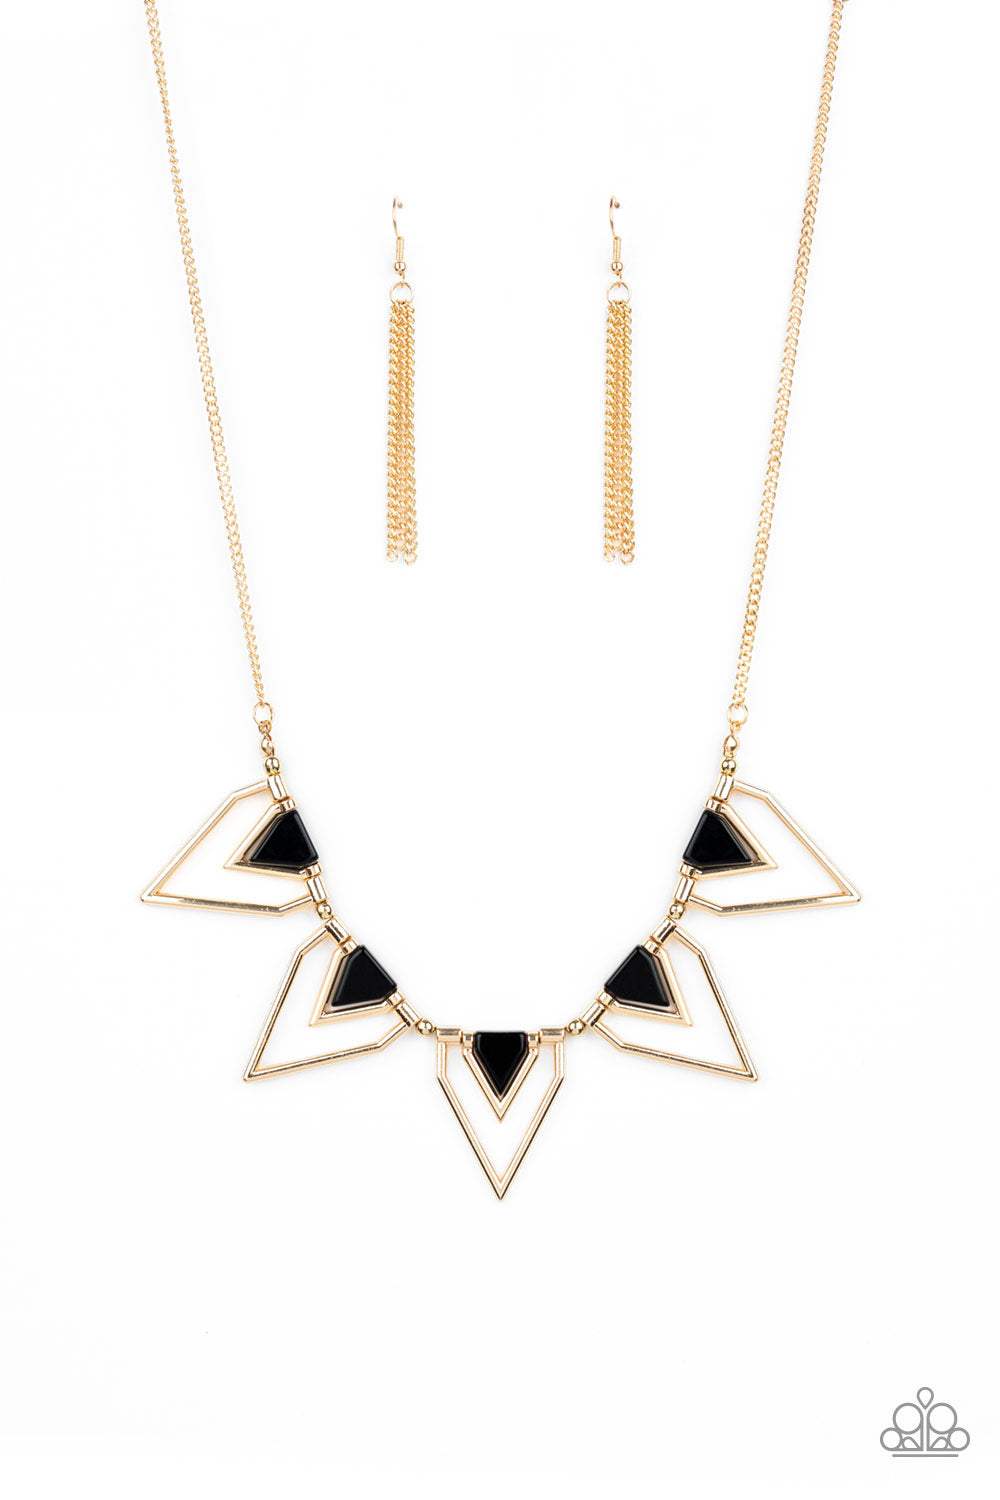 The Pack Leader Gold
Necklace - Daria's Blings N Things